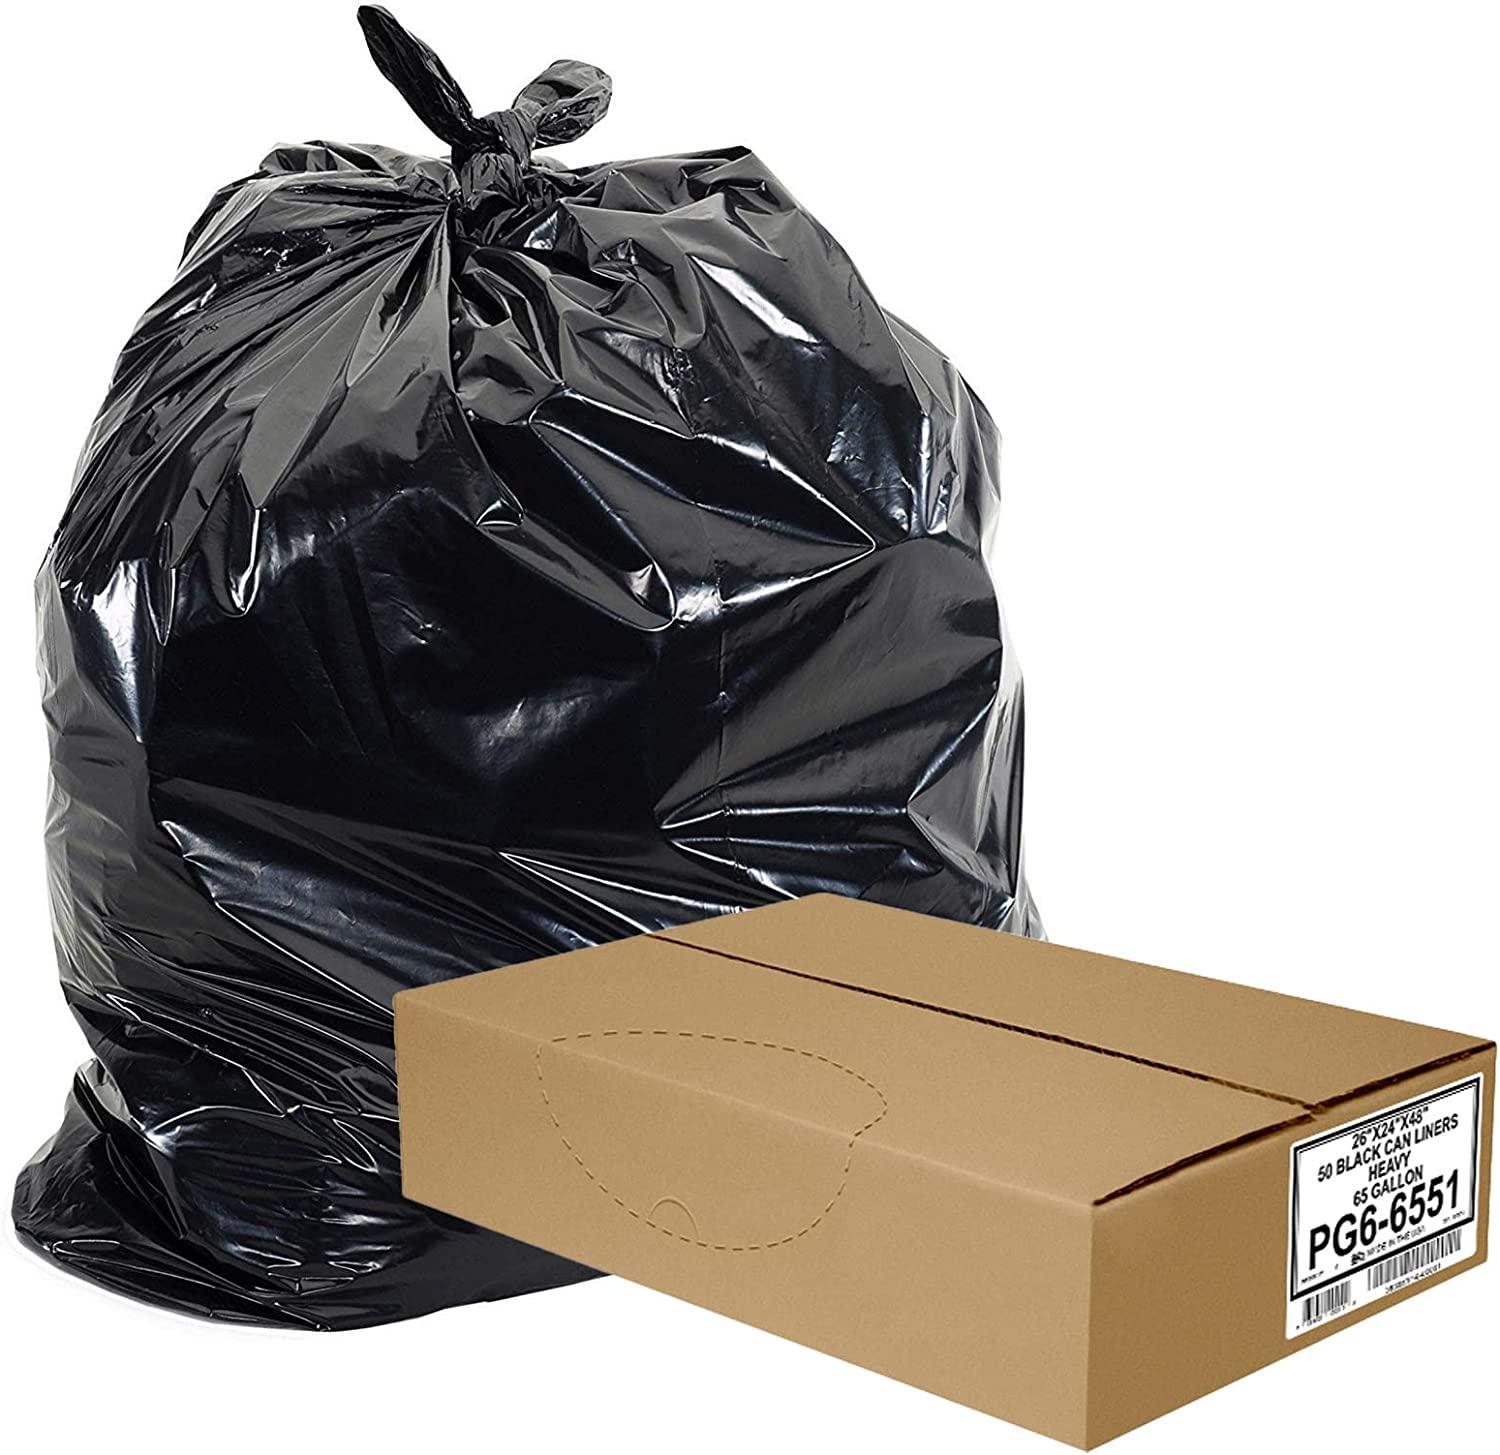 65 Gallon Trash Bags for Toter (Black 50 Garbage Bags per CASE)